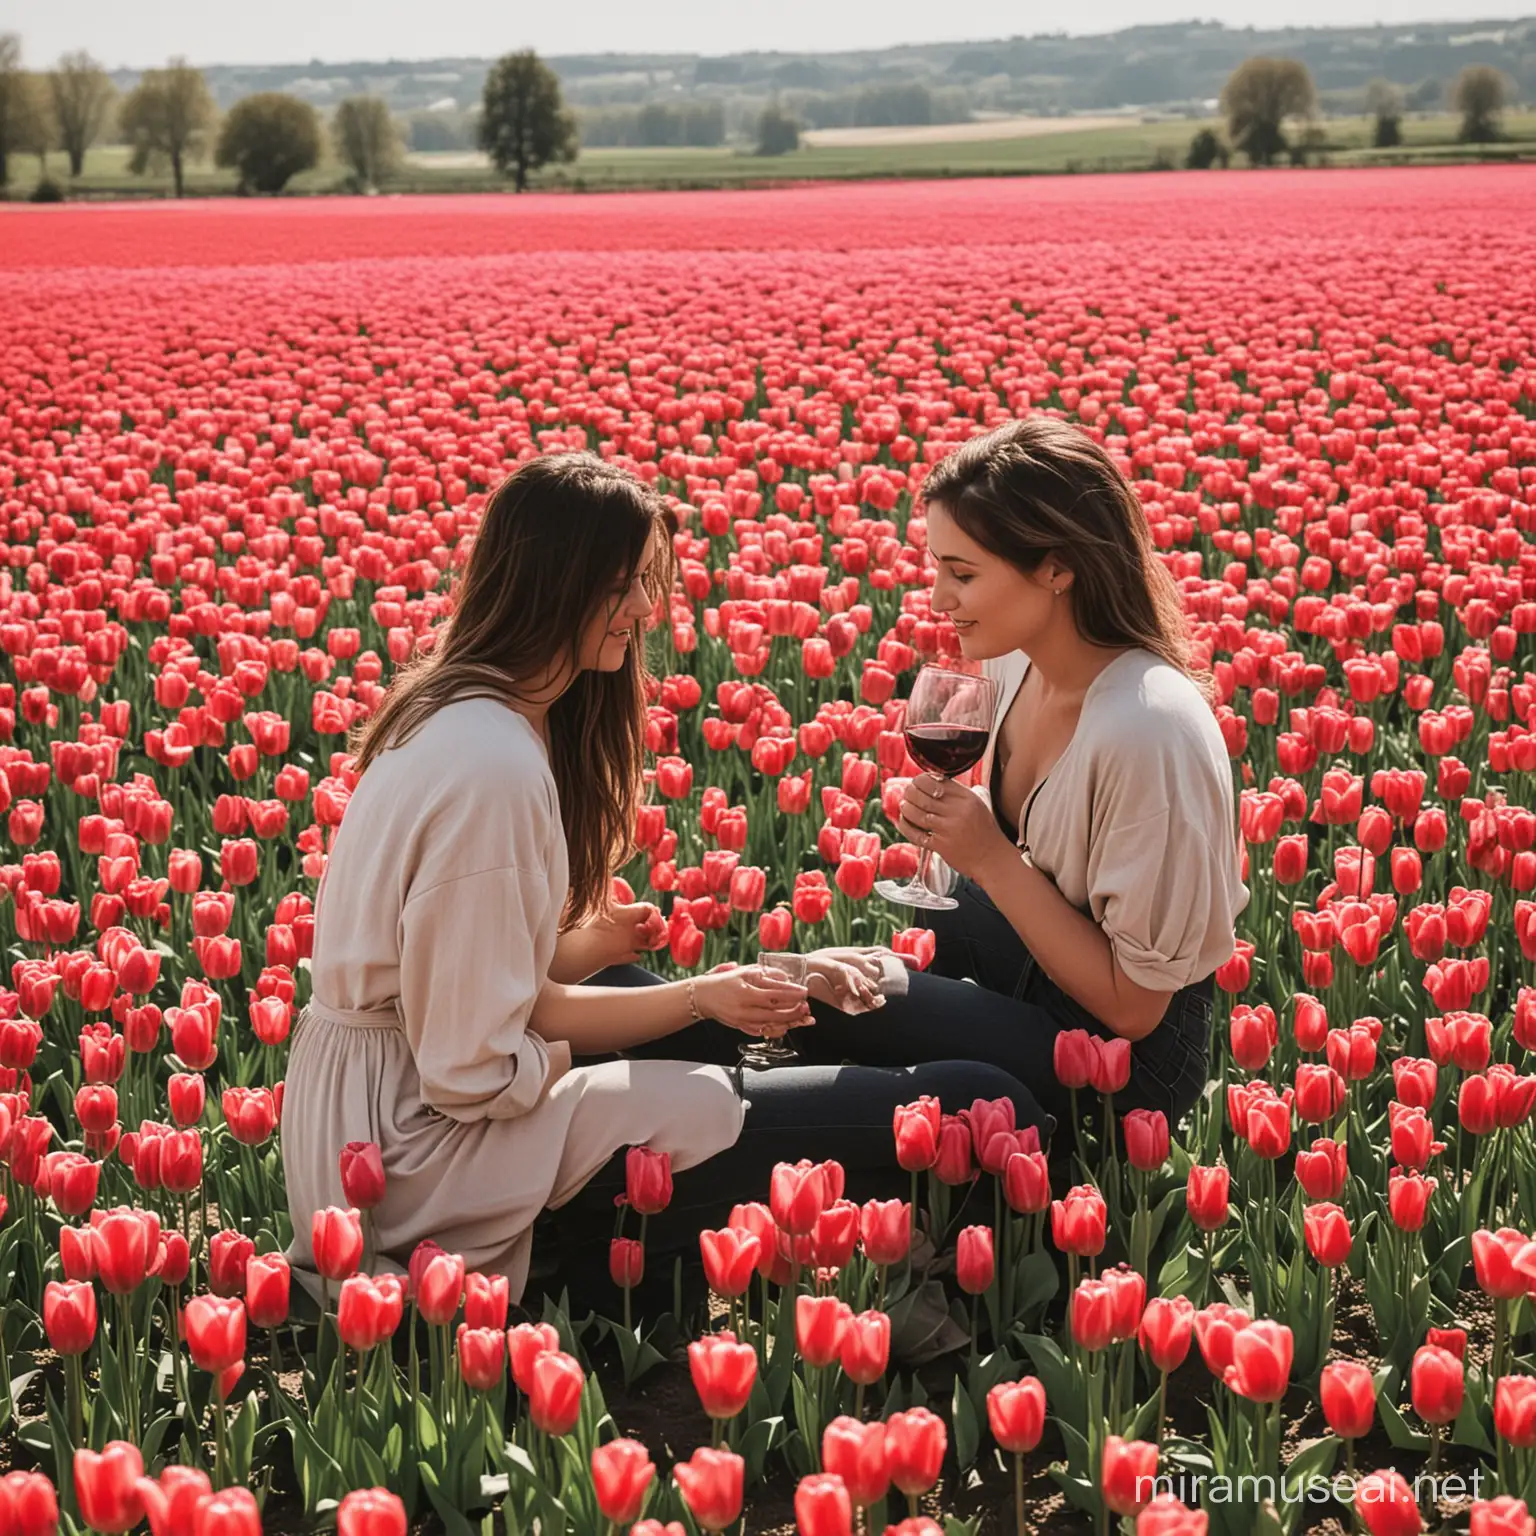 Make me a couple drinking wine against a field of tulips 